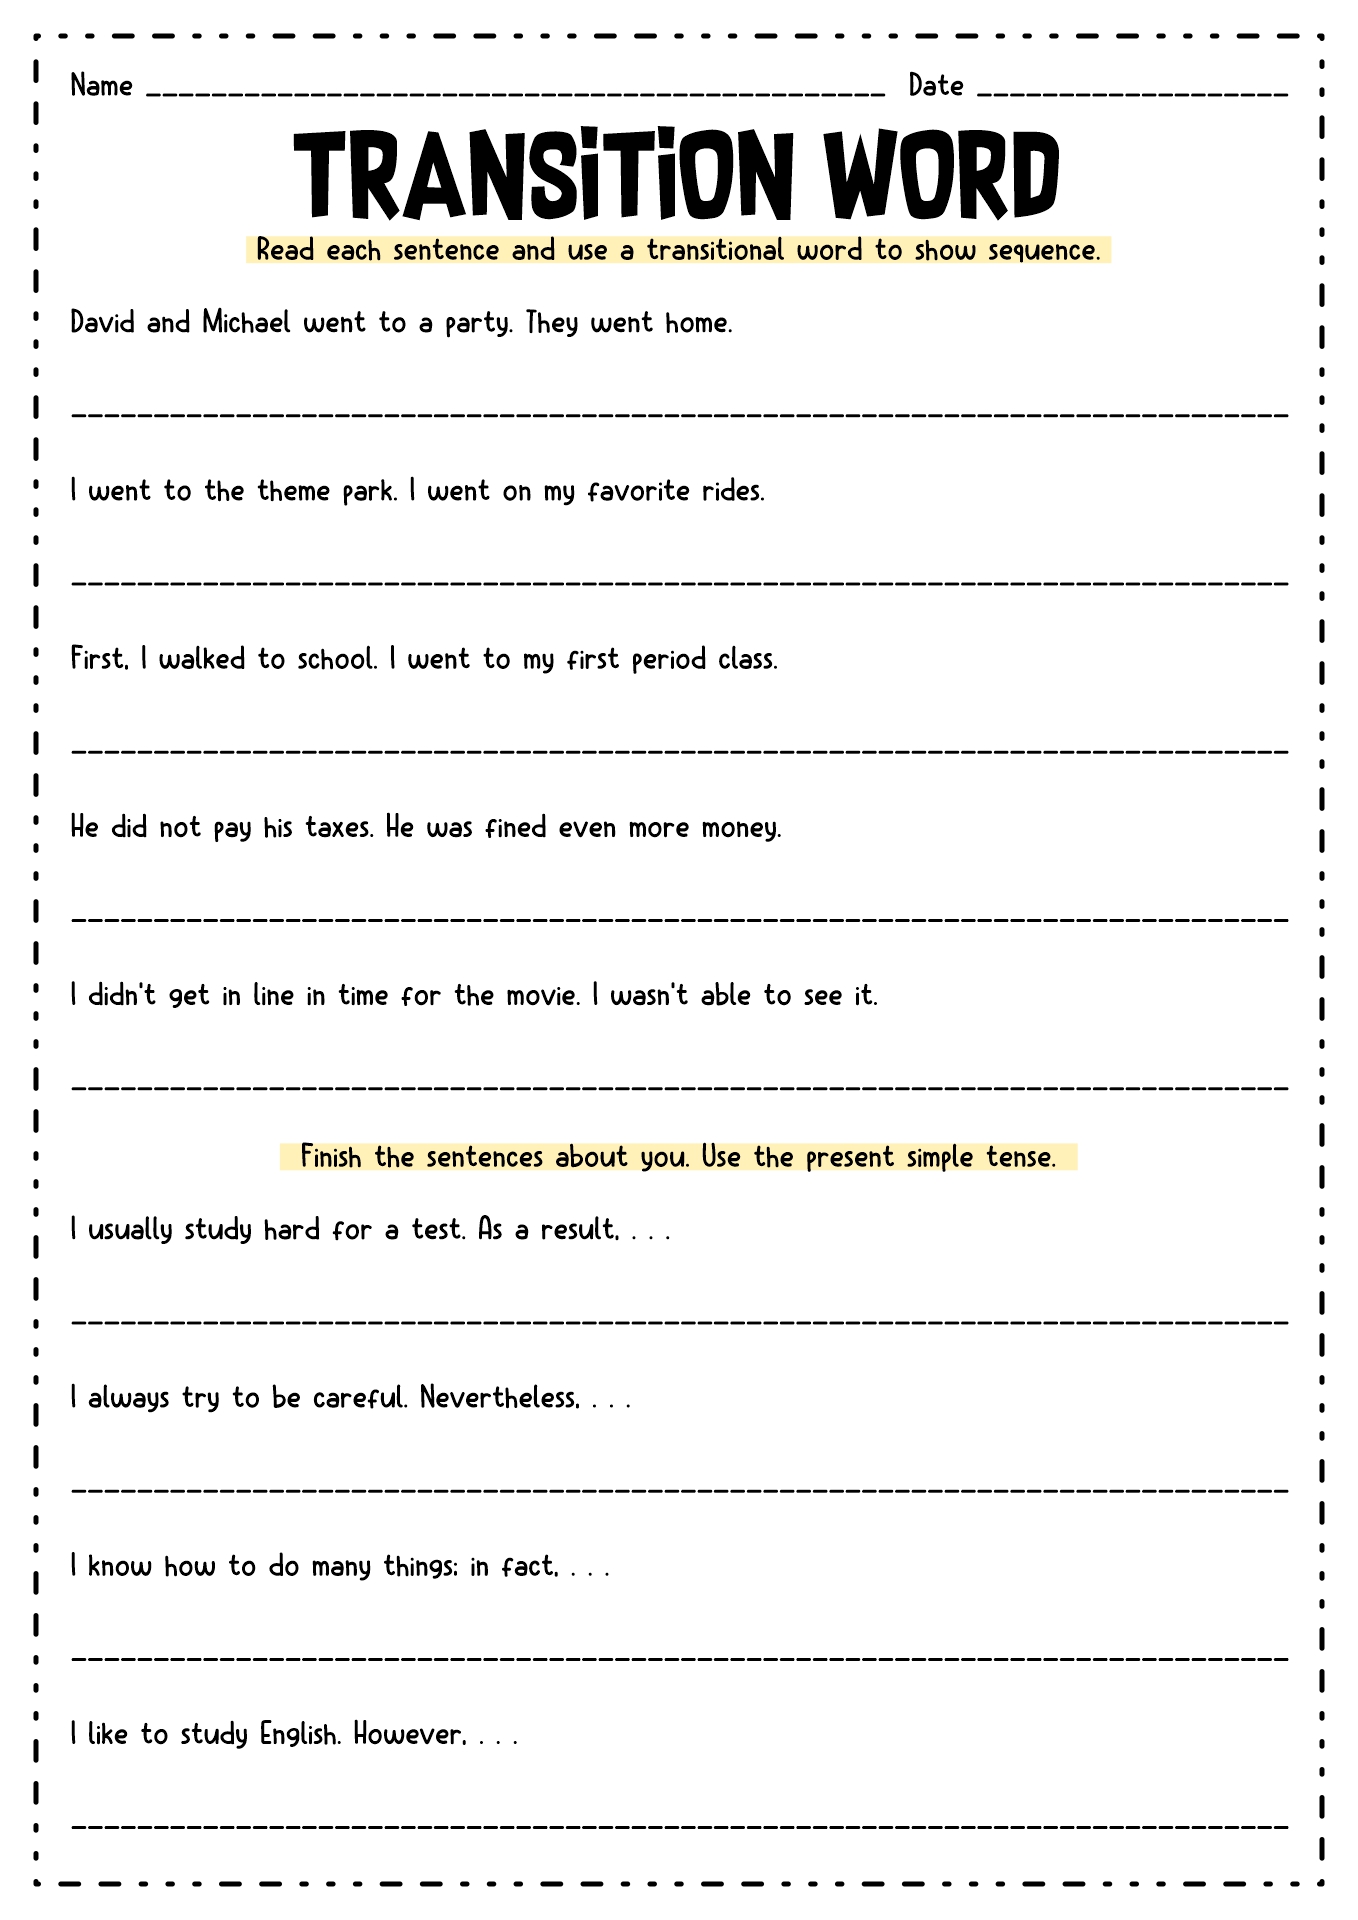 16-best-images-of-worksheets-transition-words-and-phrases-transition